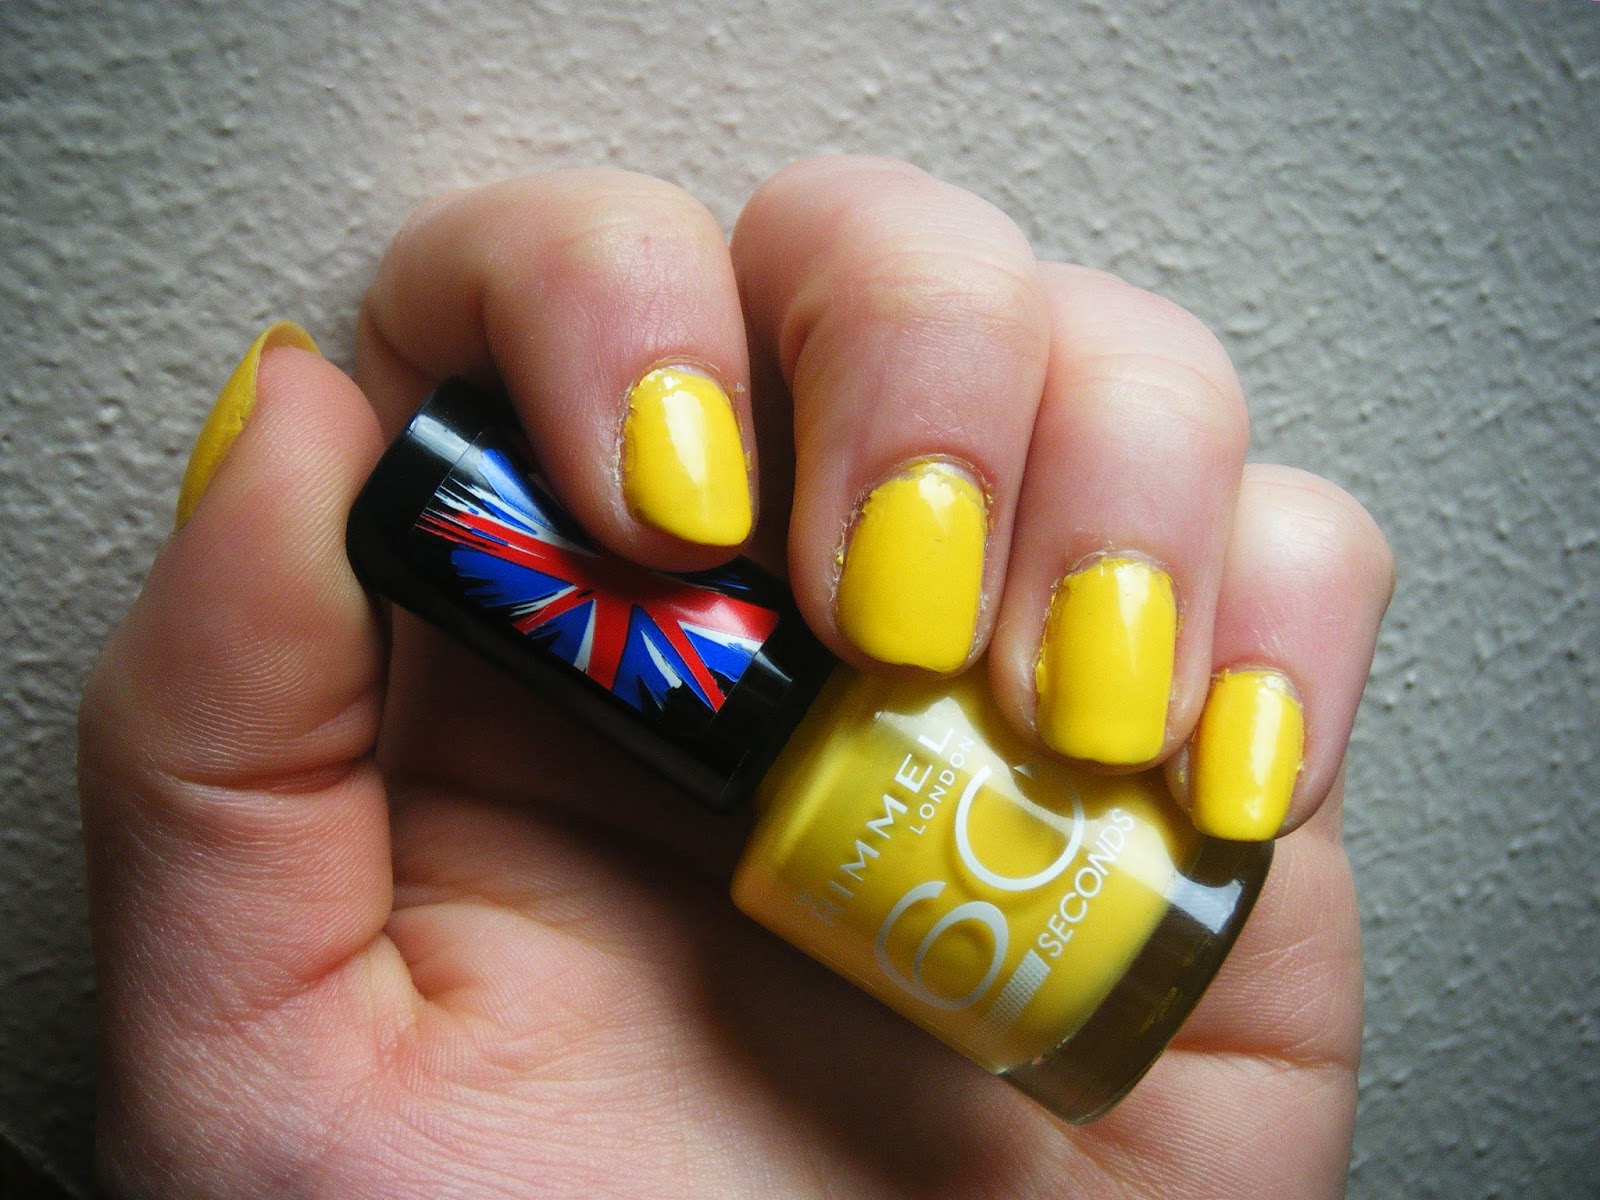 6. Miniluxe Nail Polish in "Sunny Yellow" - wide 10